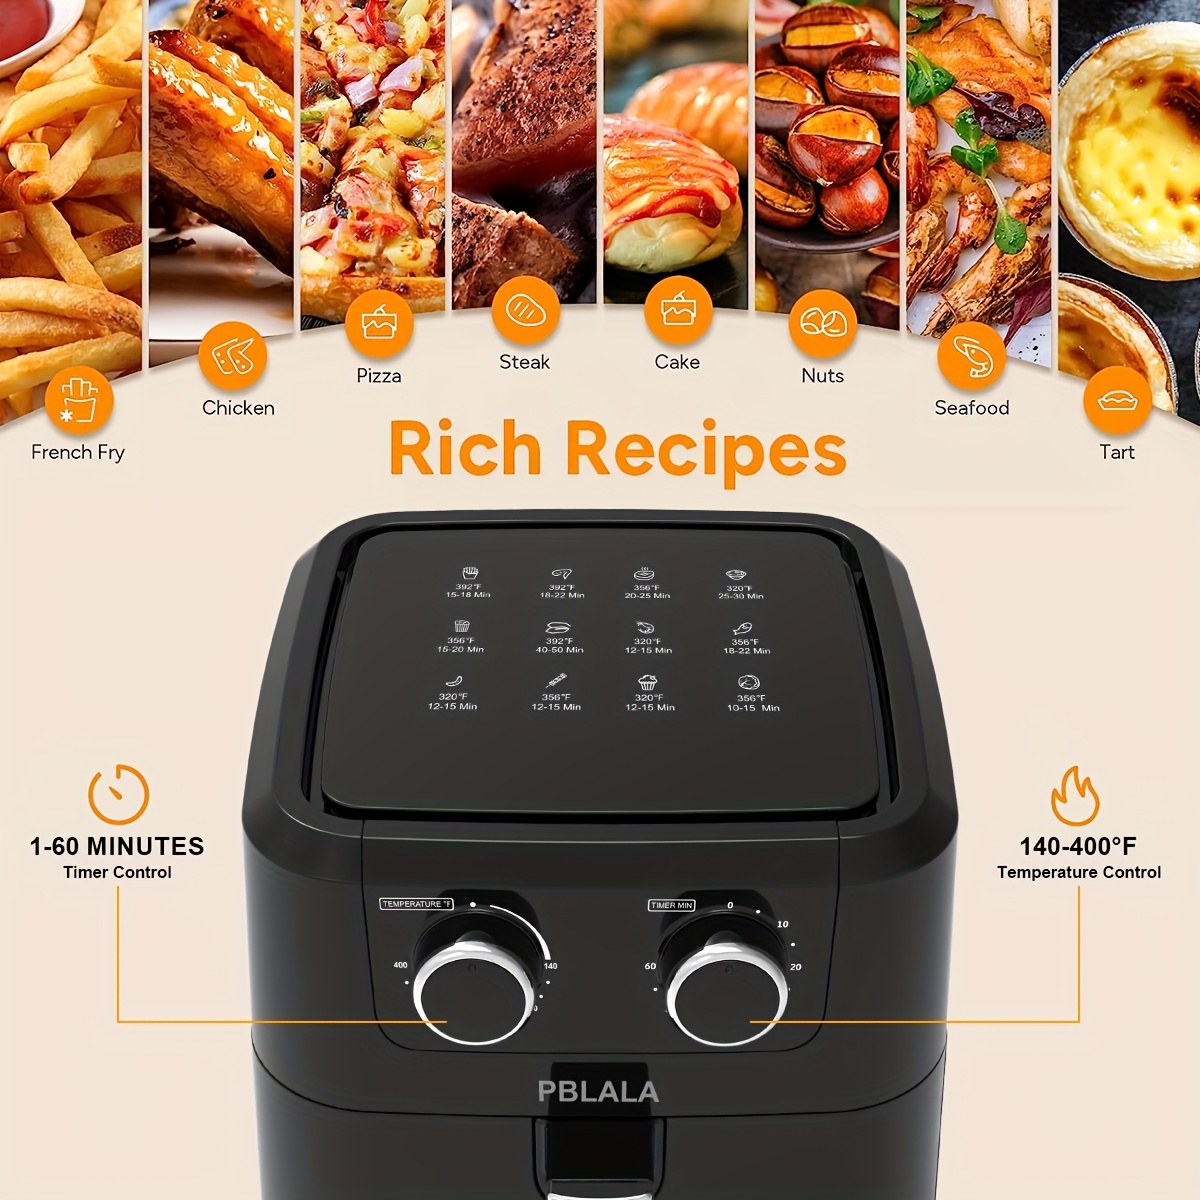 Fryer 12 QT Large Capacity 1700W Oilless Hot Air Fryers Oven Healthy Cooker  with 10 Presets, Visible Cooking Window, LCD Touch S